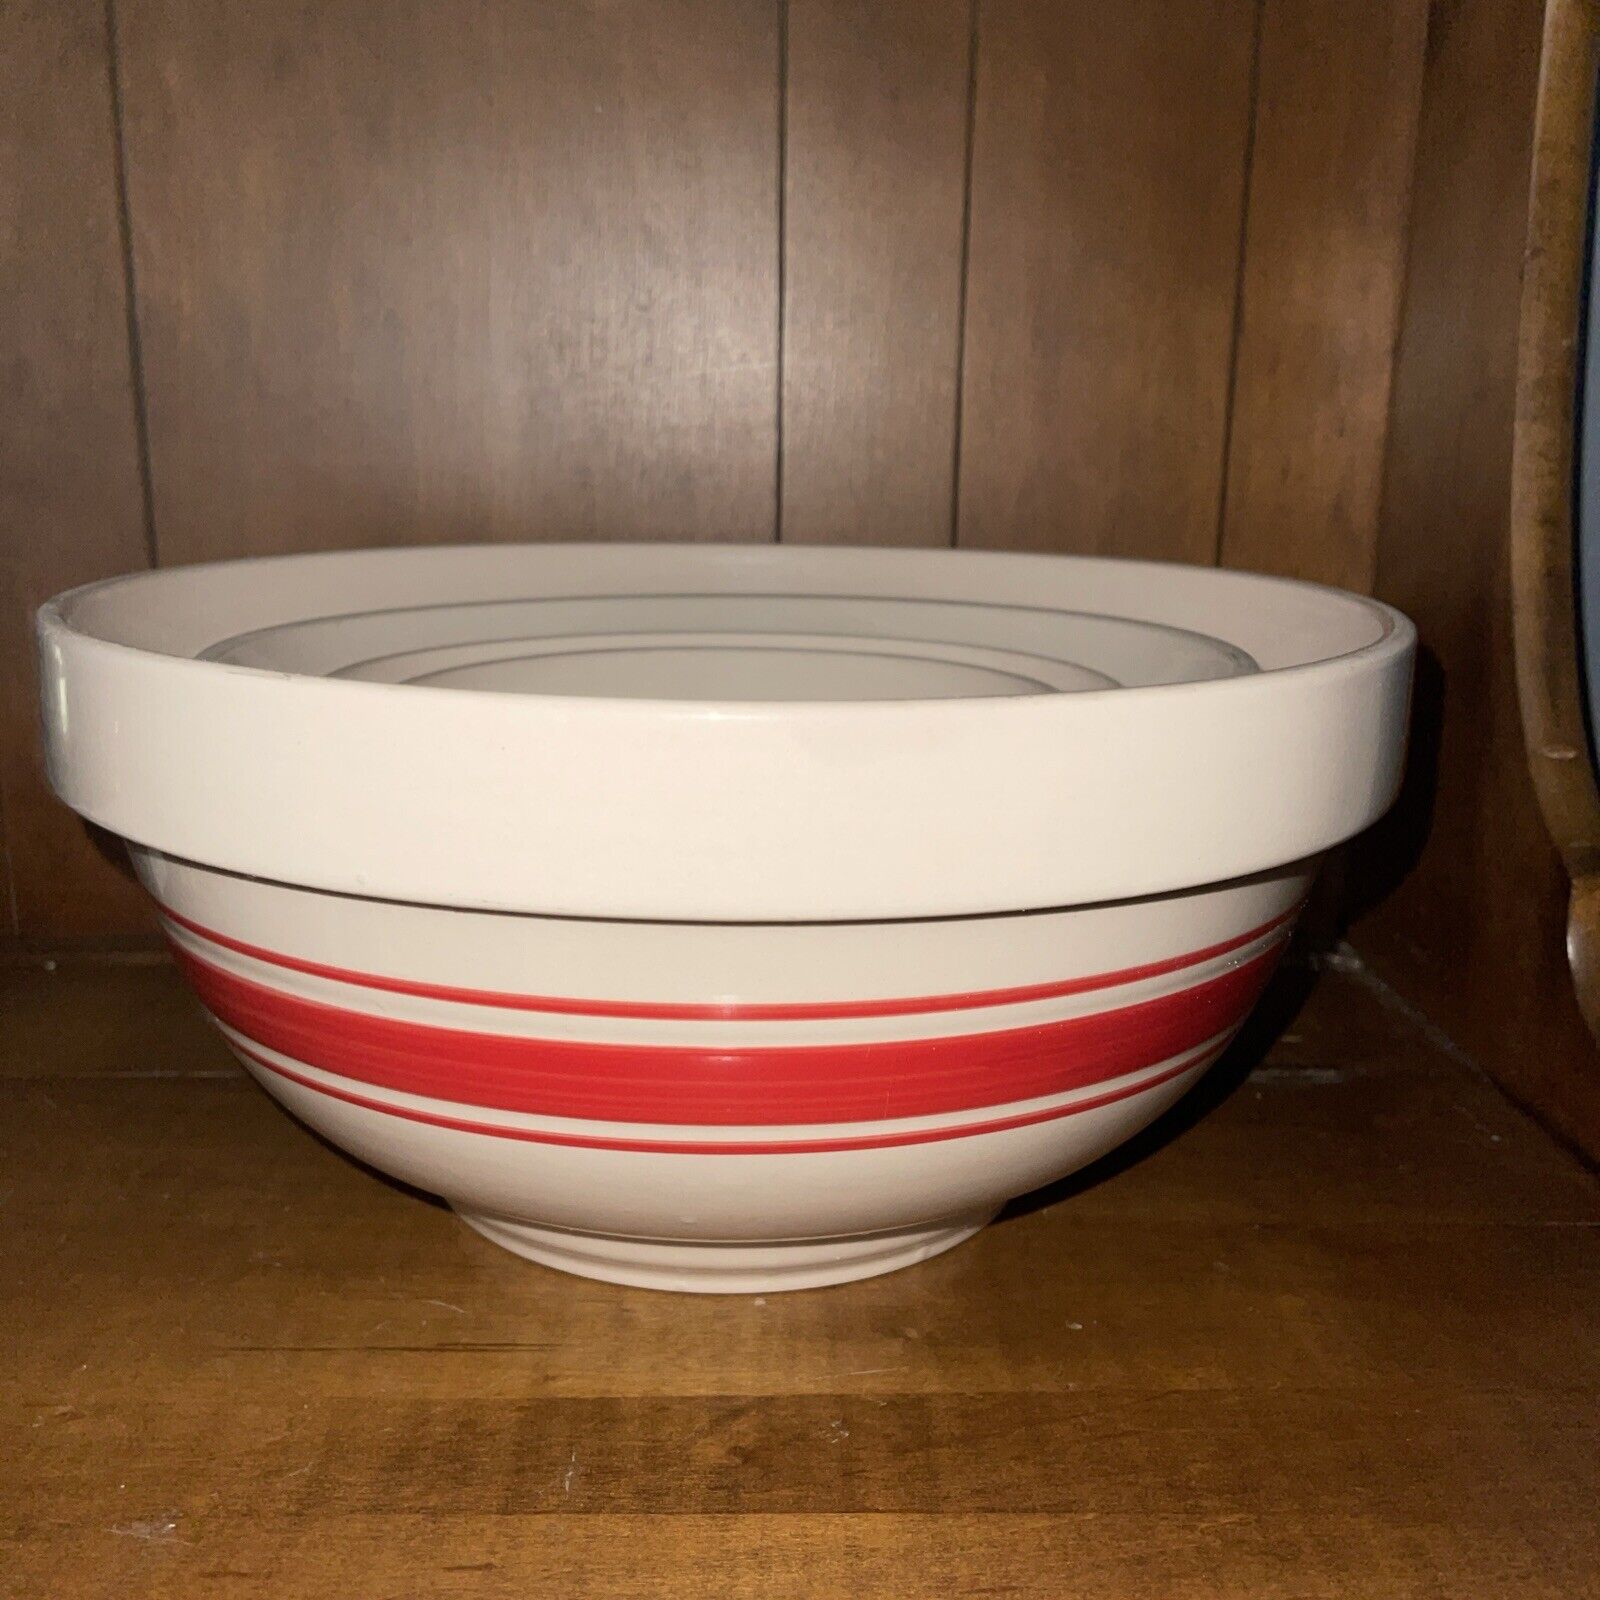 Old Mountain Red Ringed Nesting Mixing Bowl Set Vintage New Old Stock Set Of 4